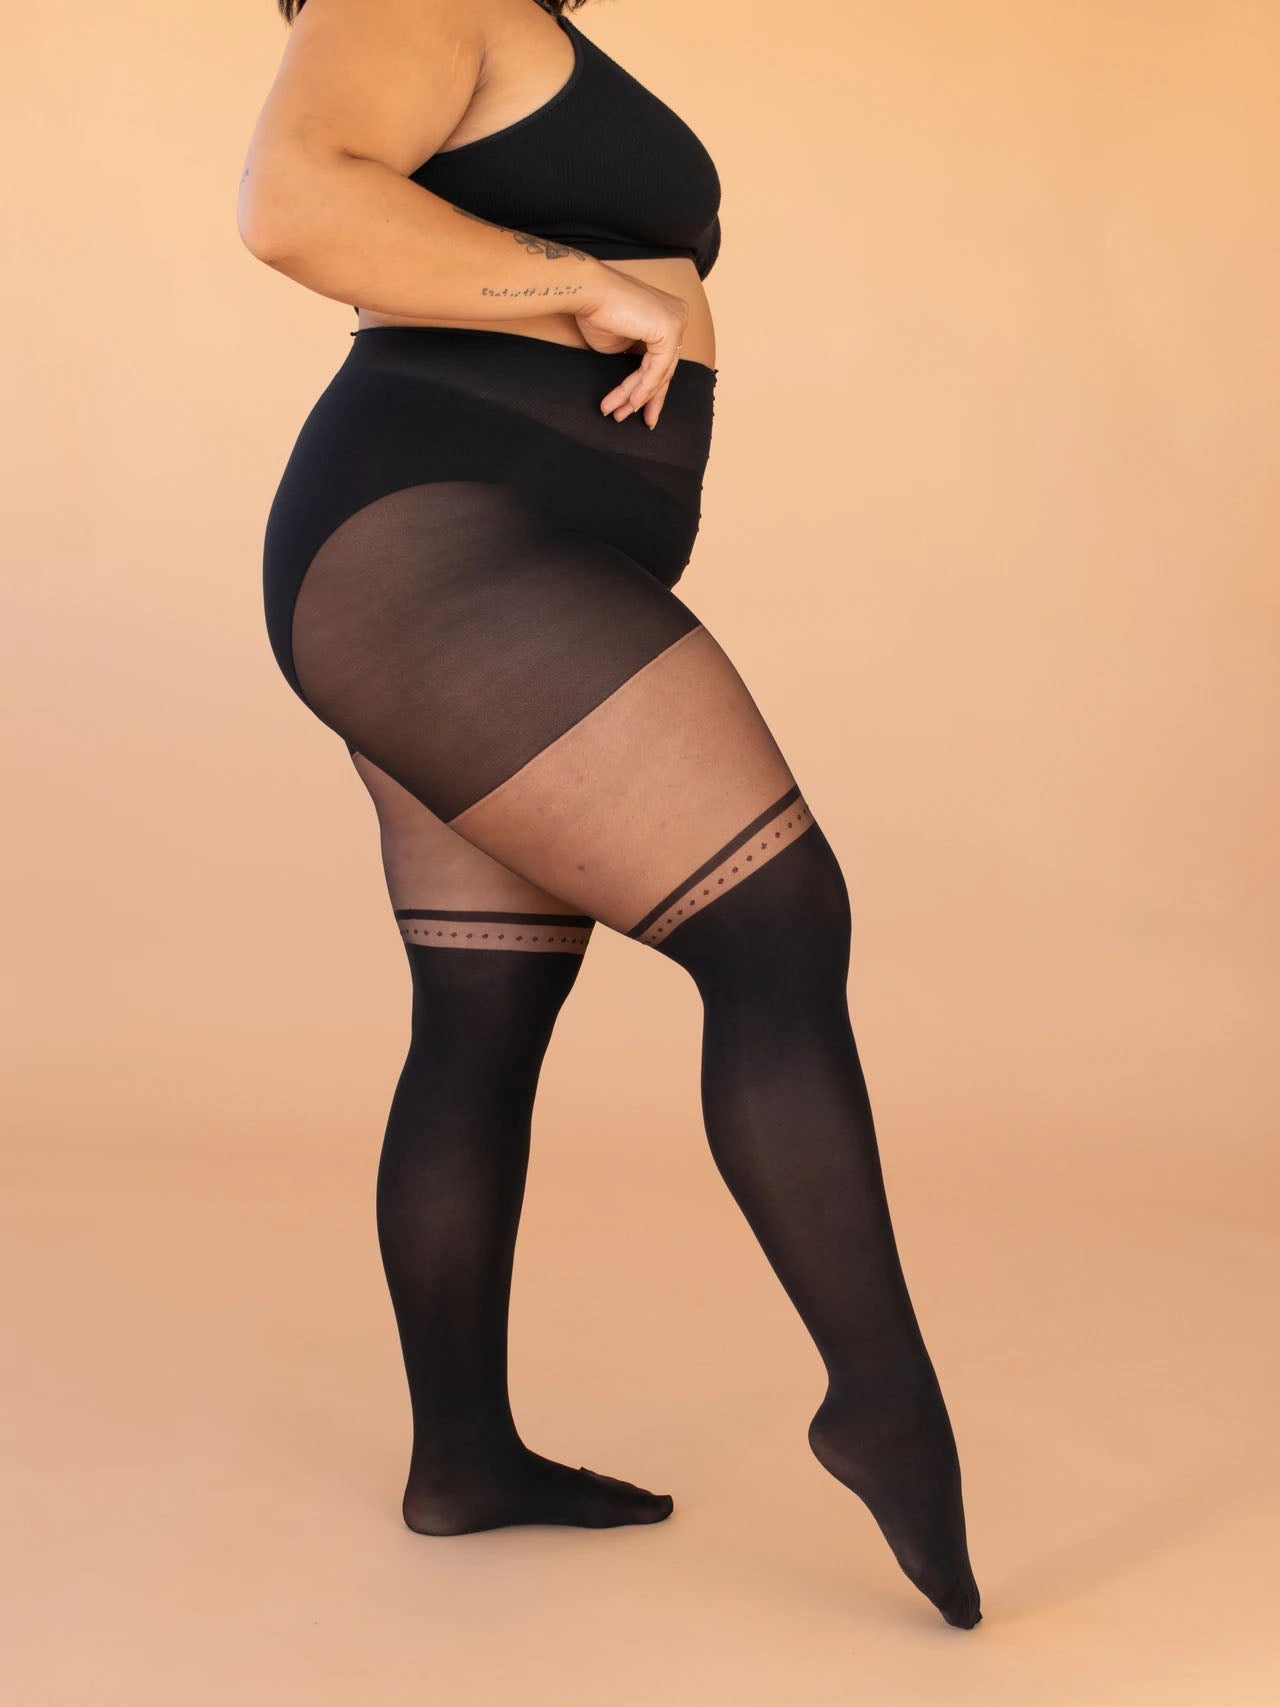 Plus size over-the-knee hosiery